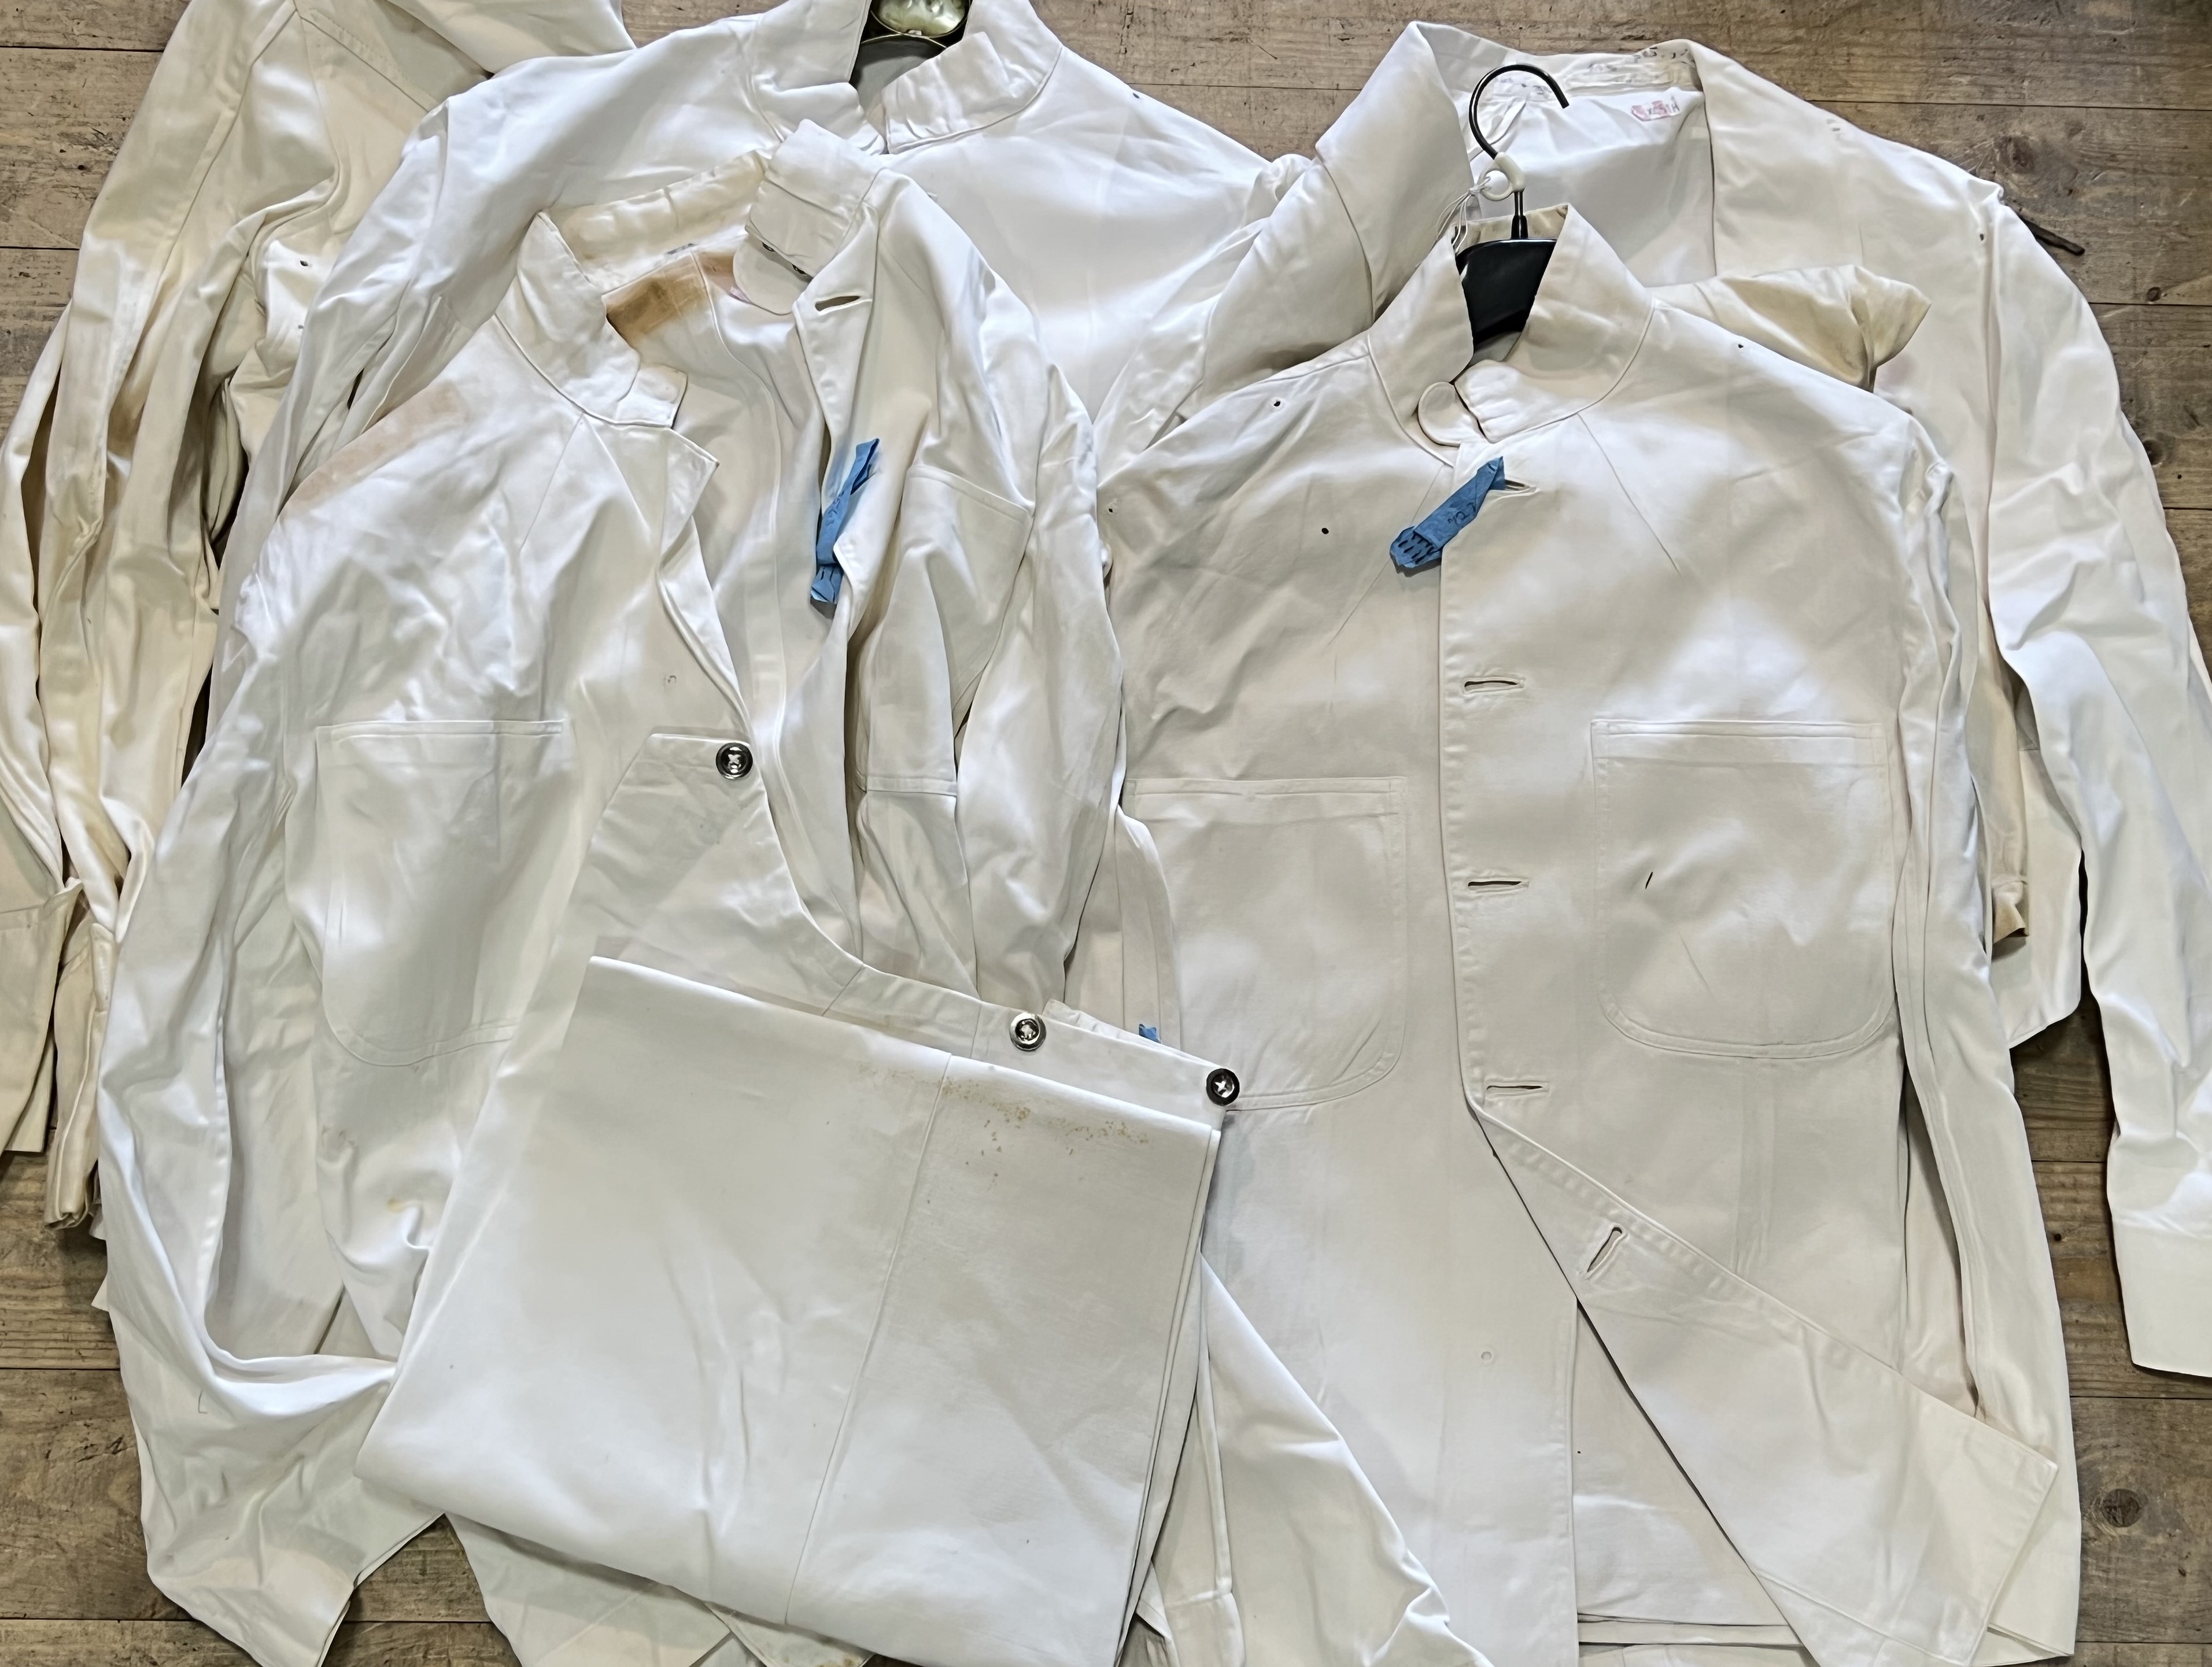 A mixed lot of Naval Officer's tropical white uniforms and mess kit